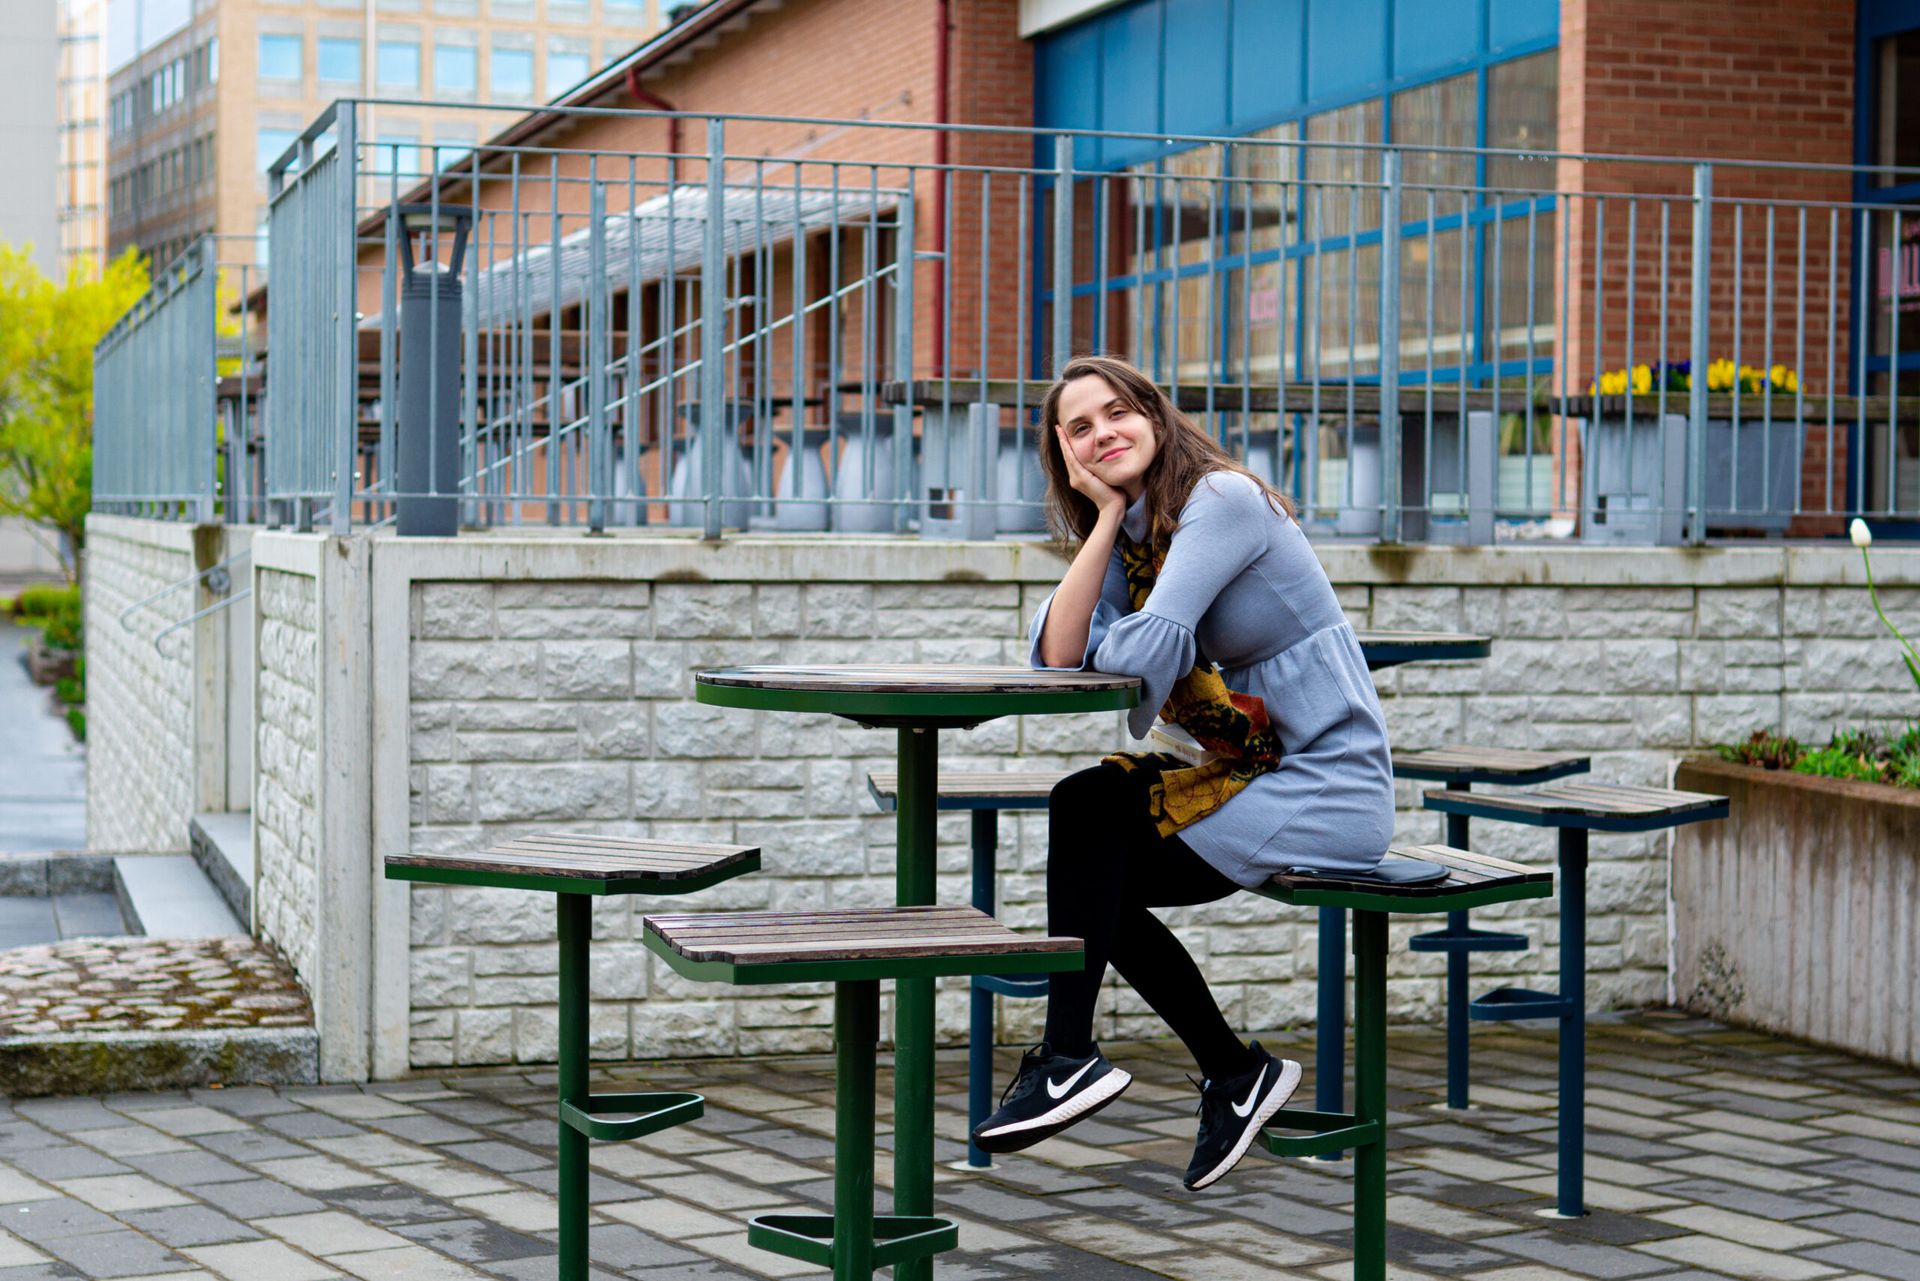 A woman sitting on a chair outdoors at a university campus.